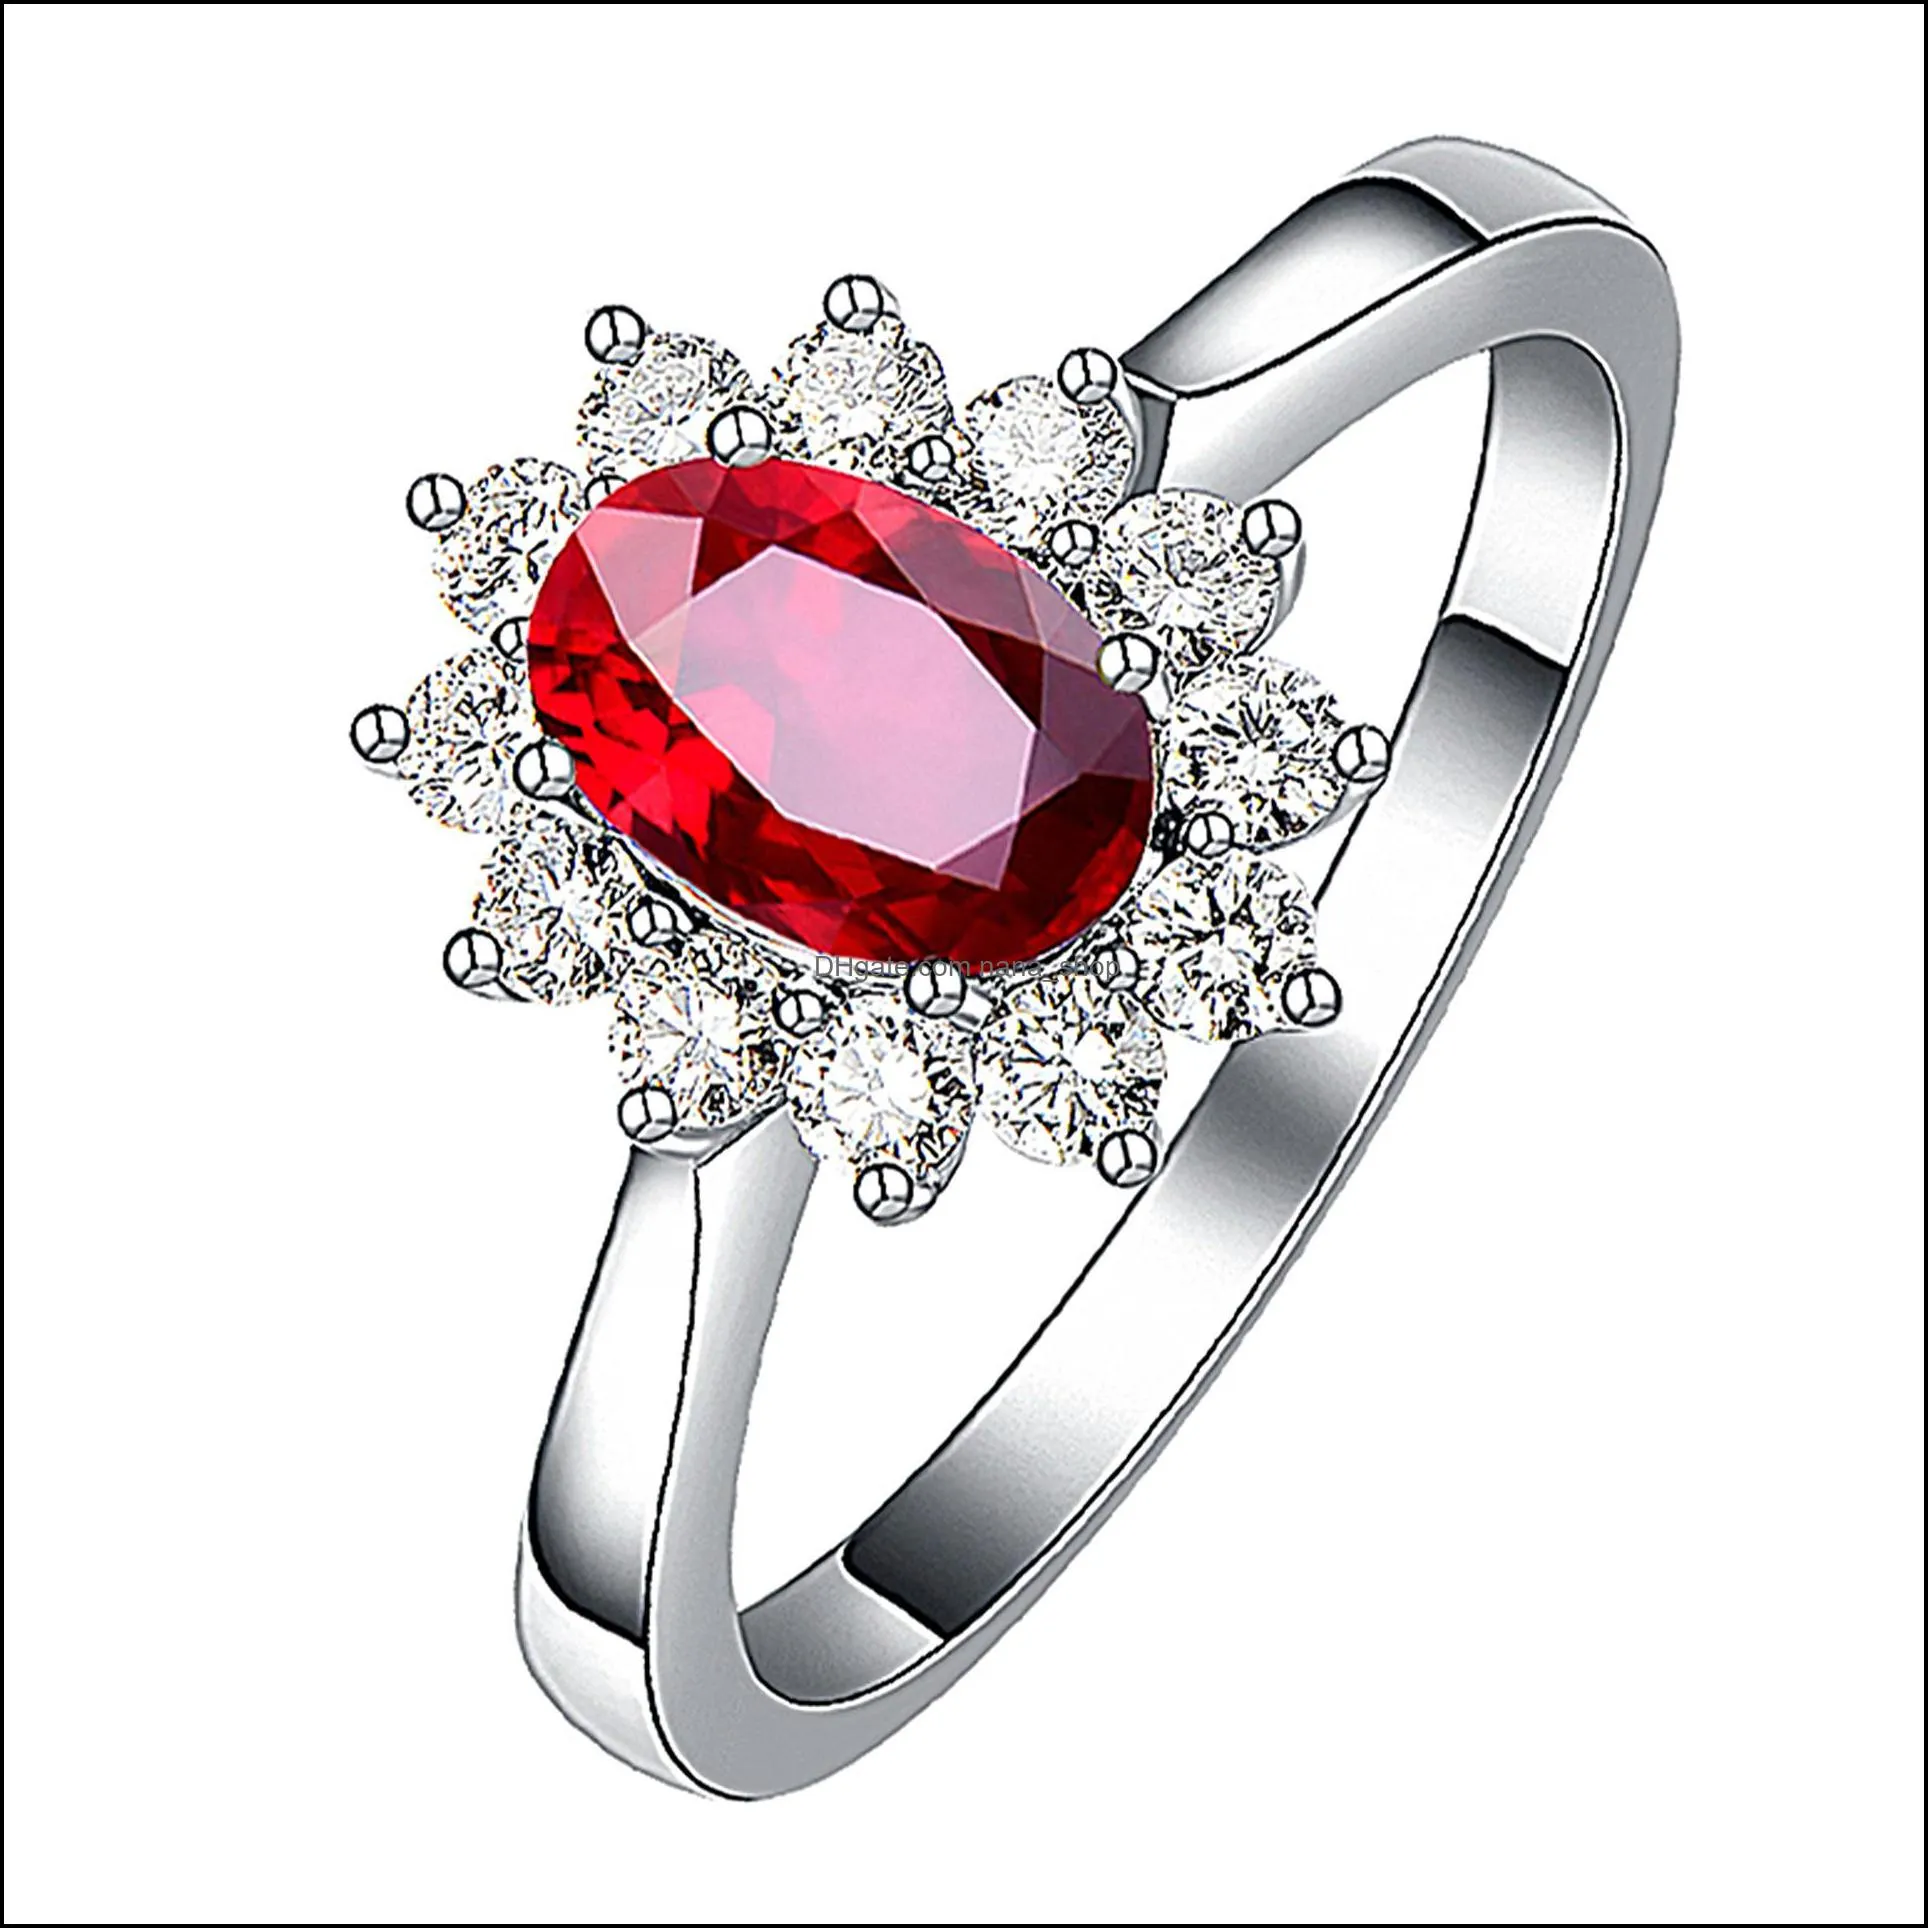 925 sterling silver ring timeless elegance crown red tilted heart solitaire ring for women jewelry nanashop